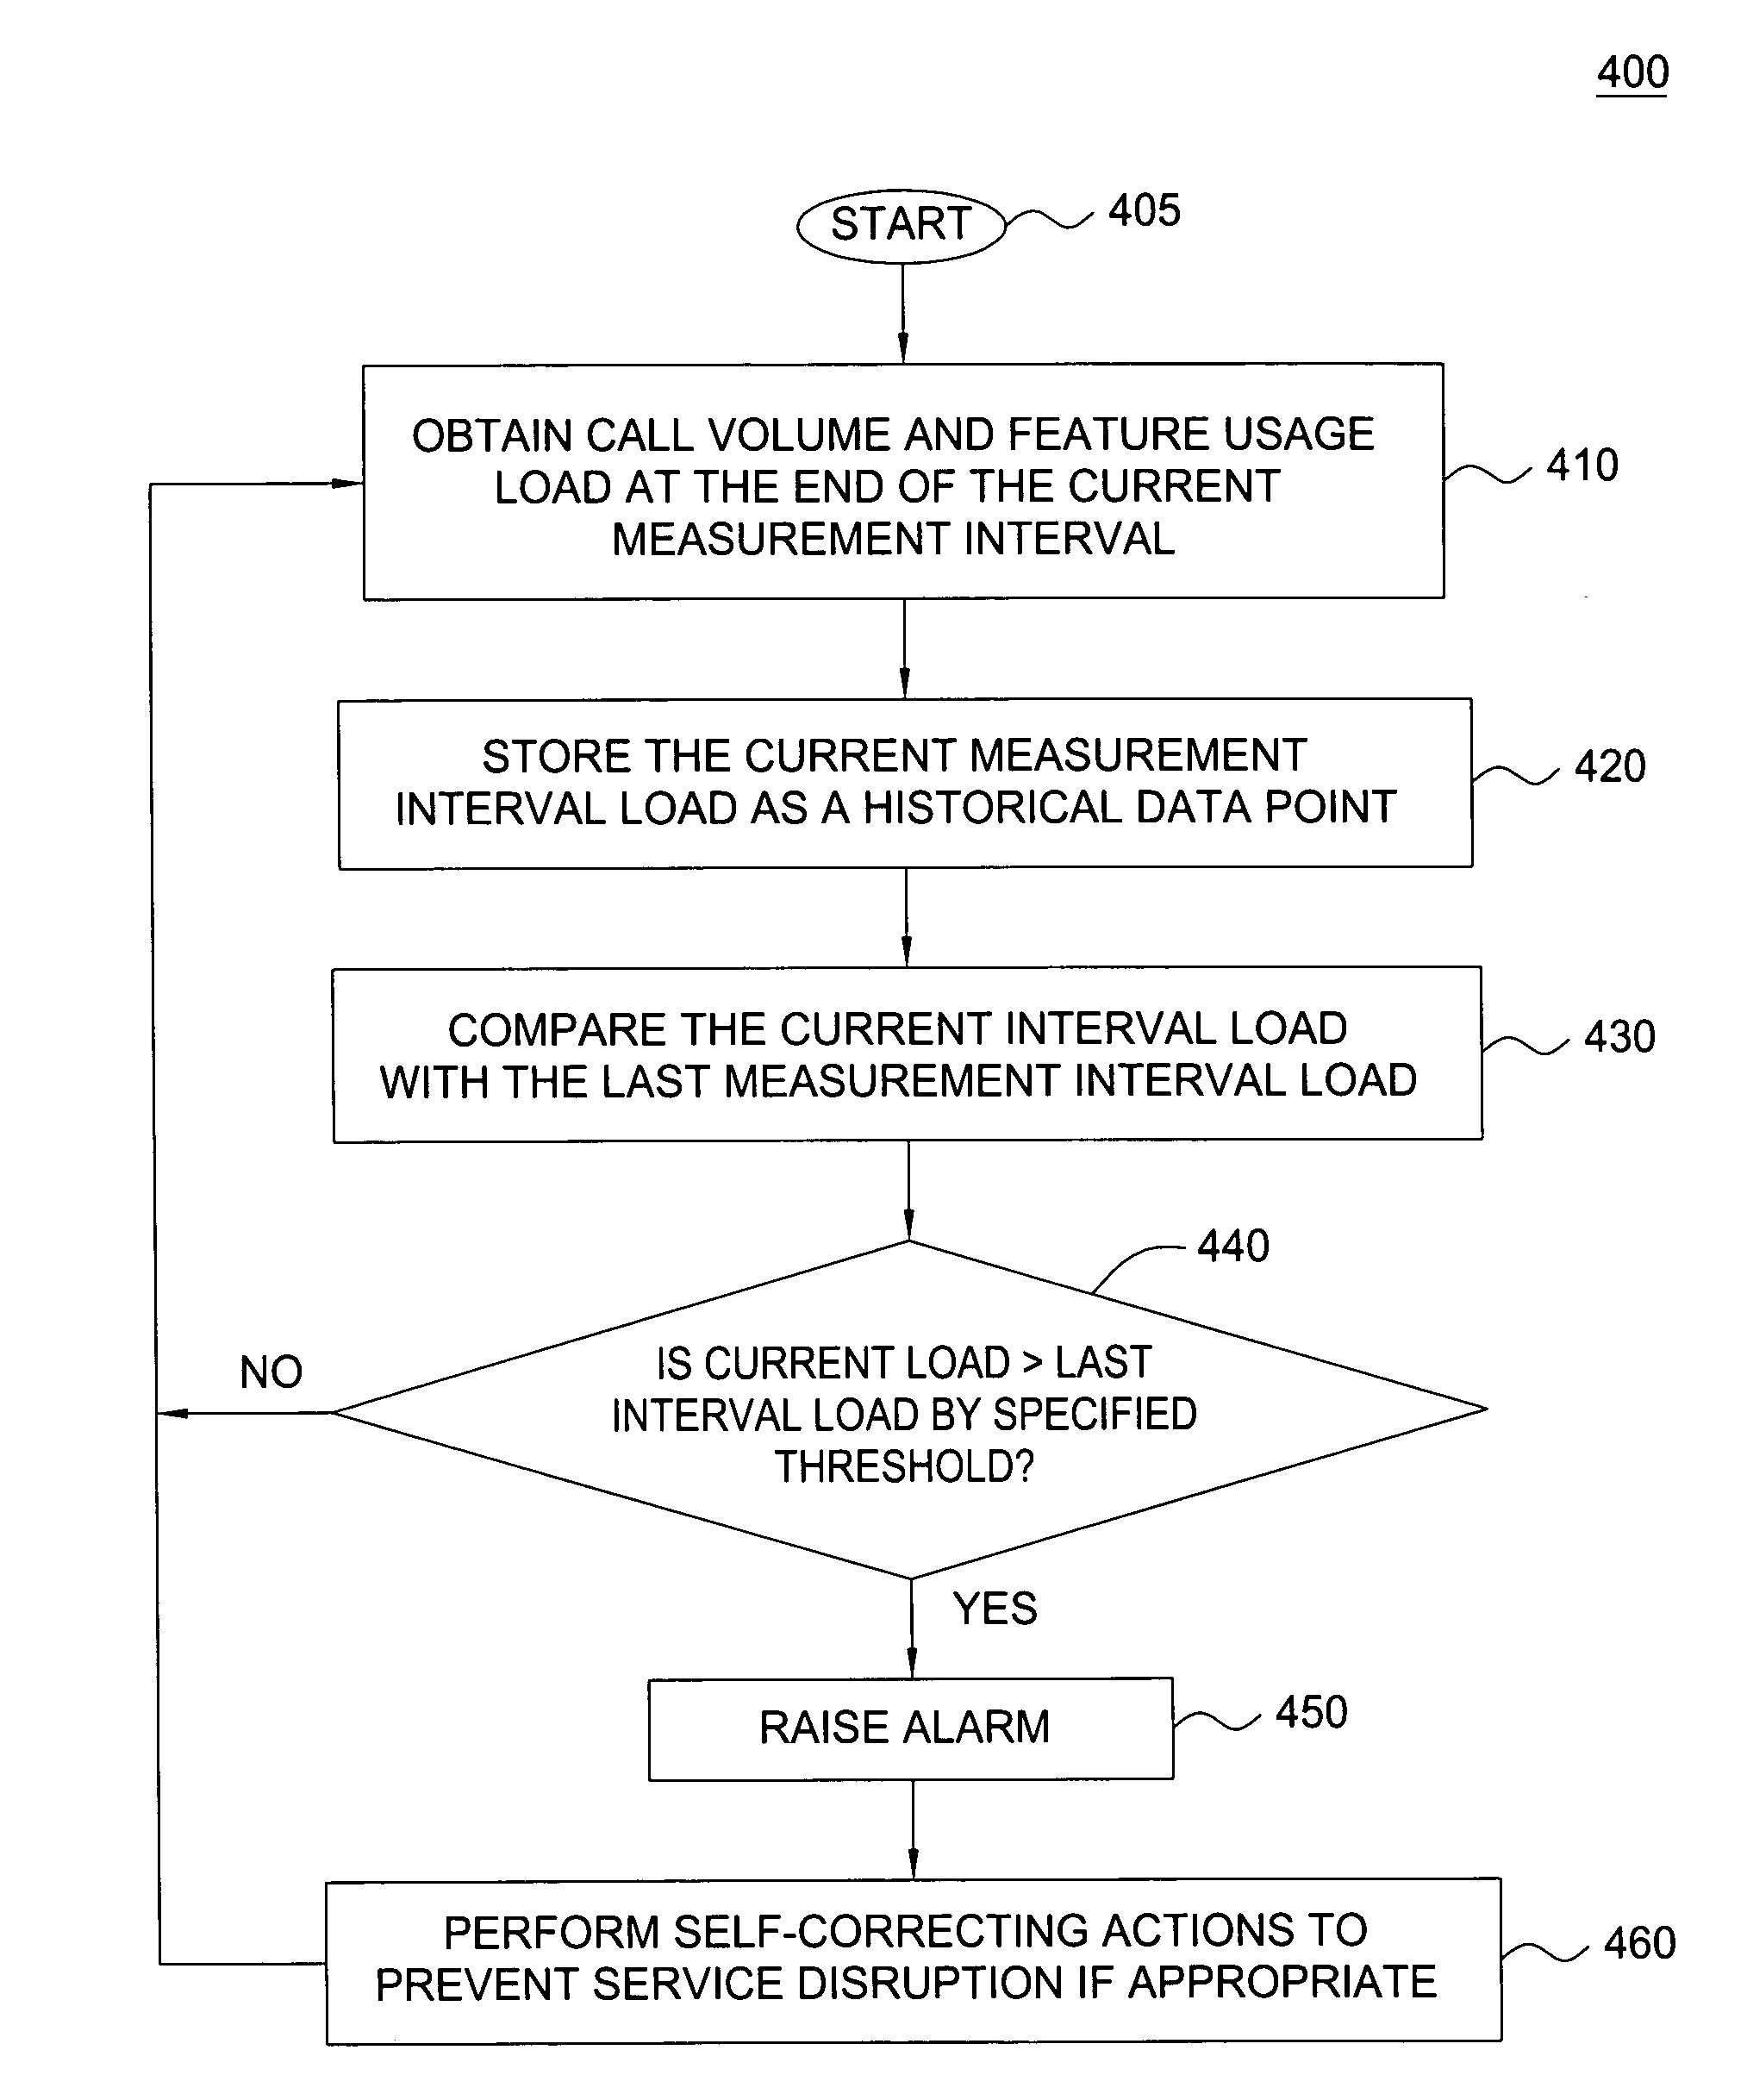 Method and apparatus for monitoring shifts in call patterns